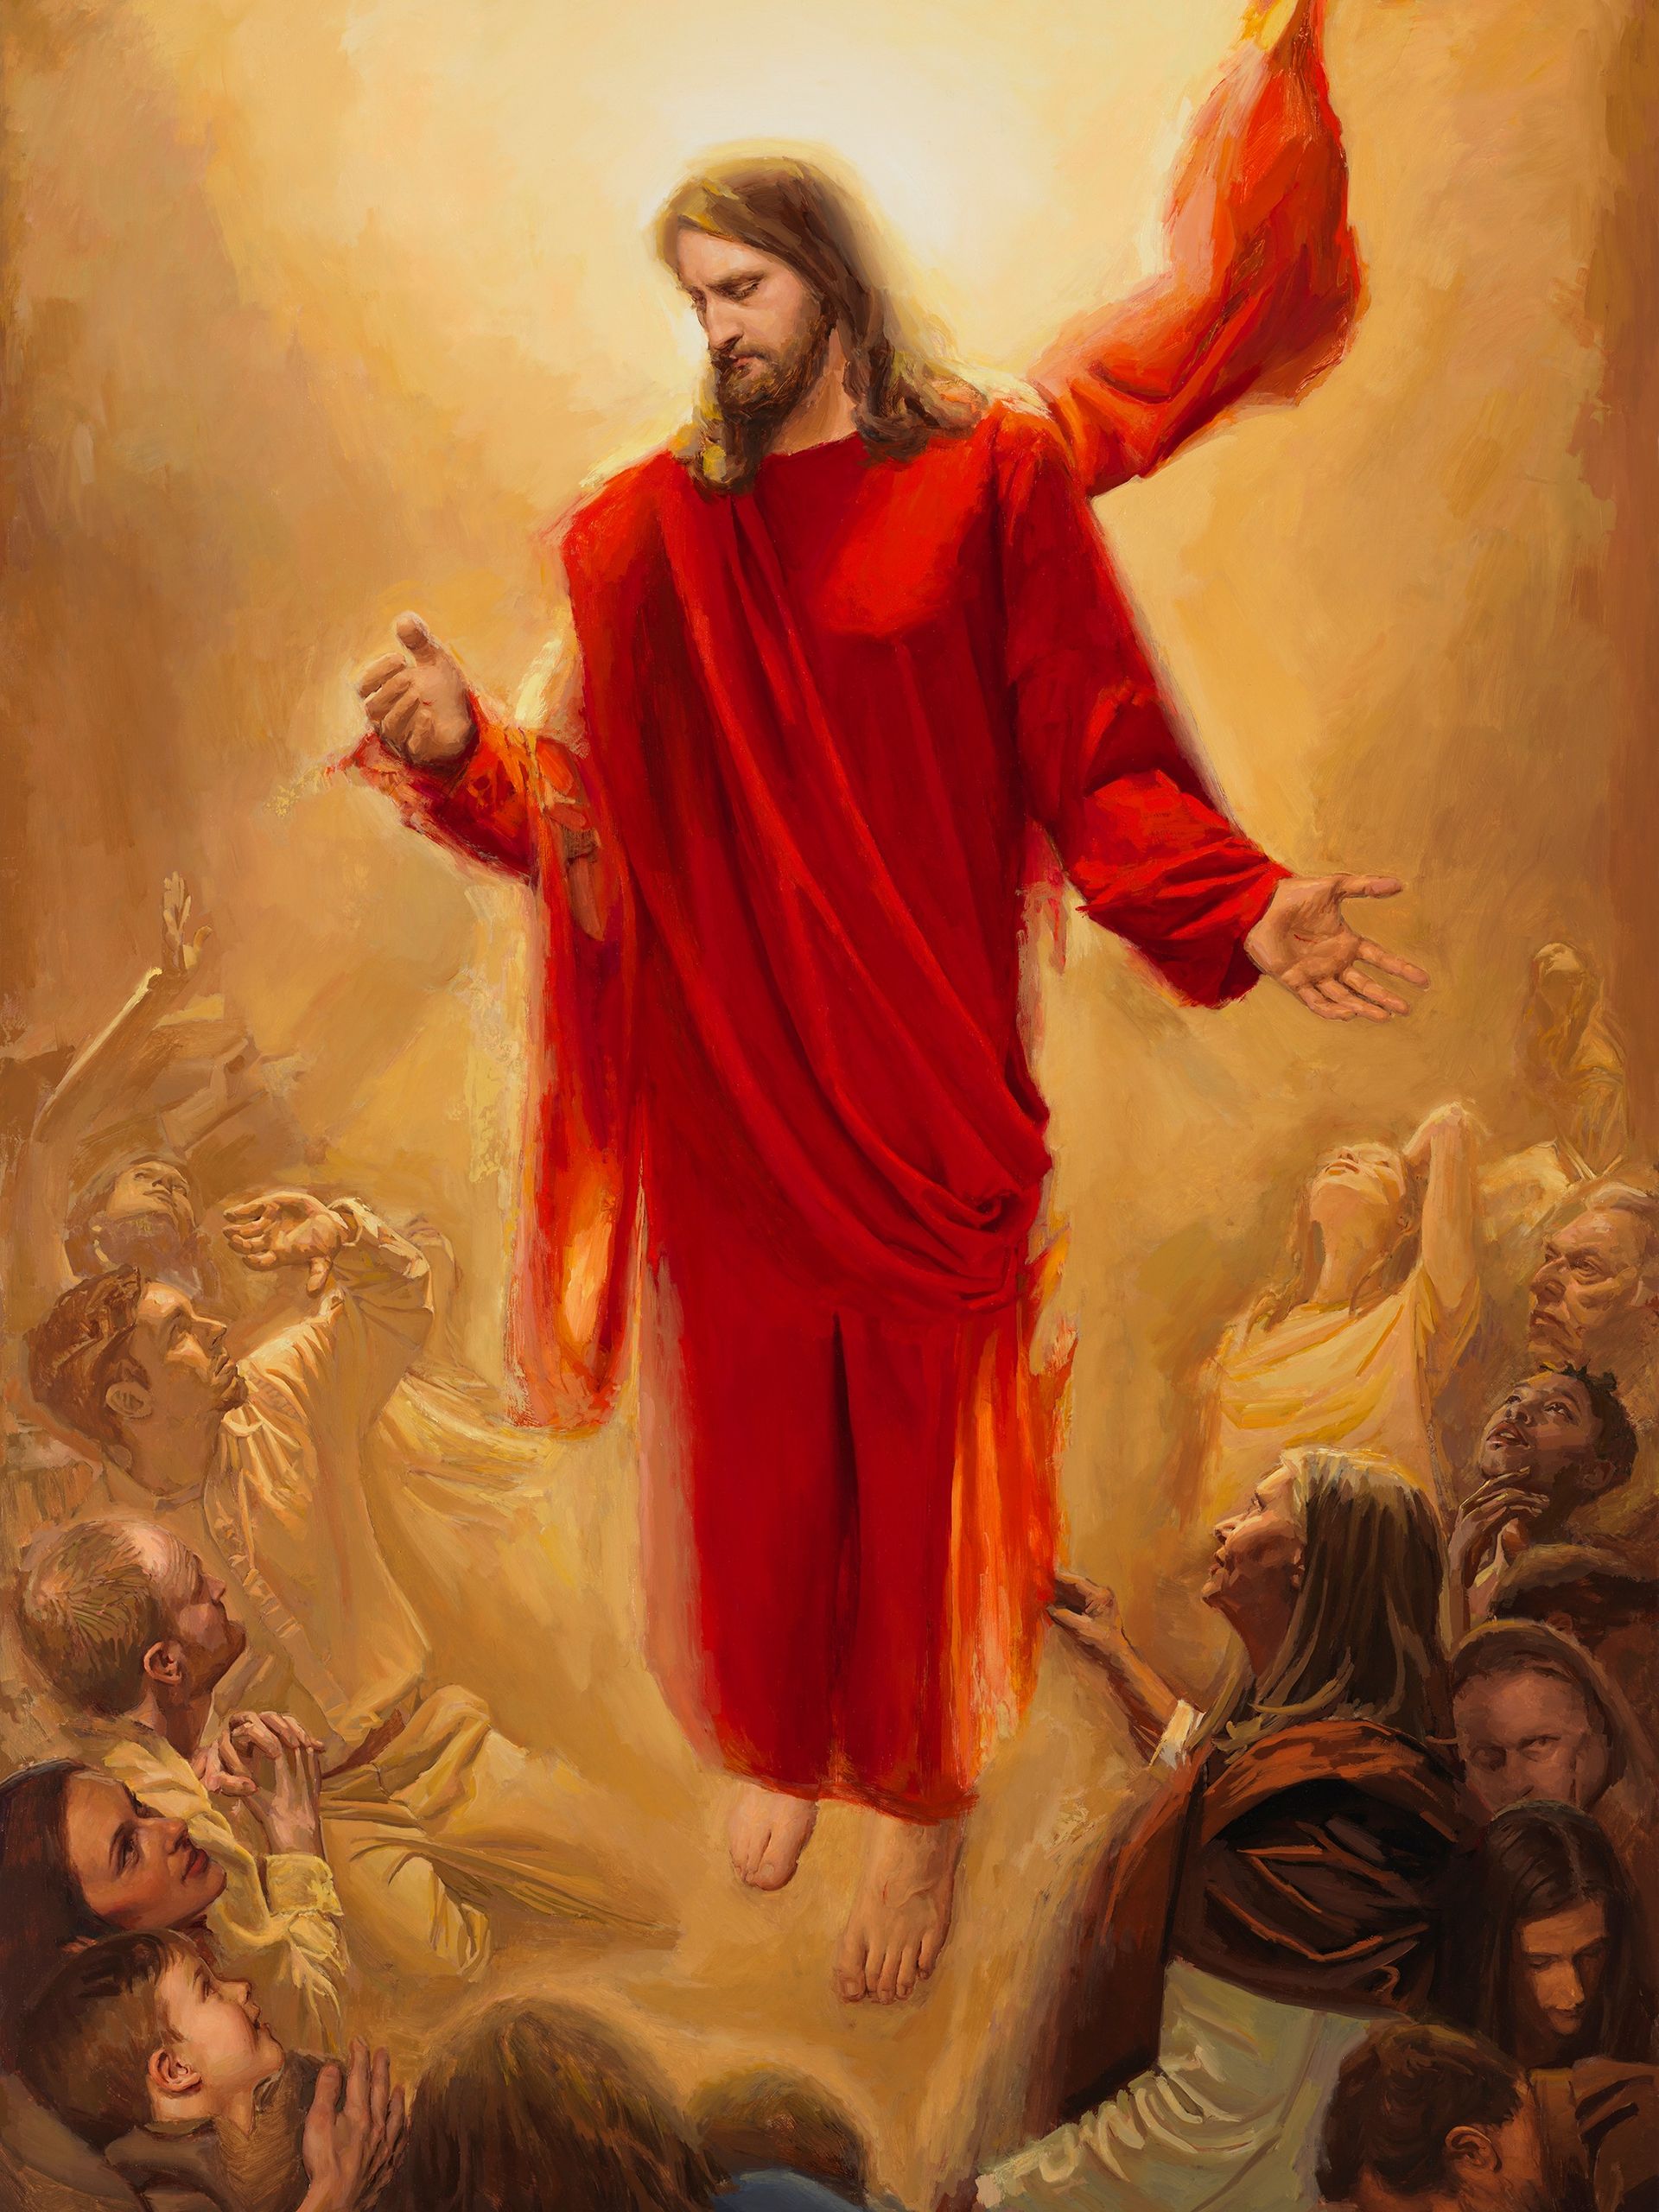 Painting of Christ descending in a red robe among a group of people from multiple eras and cultures.